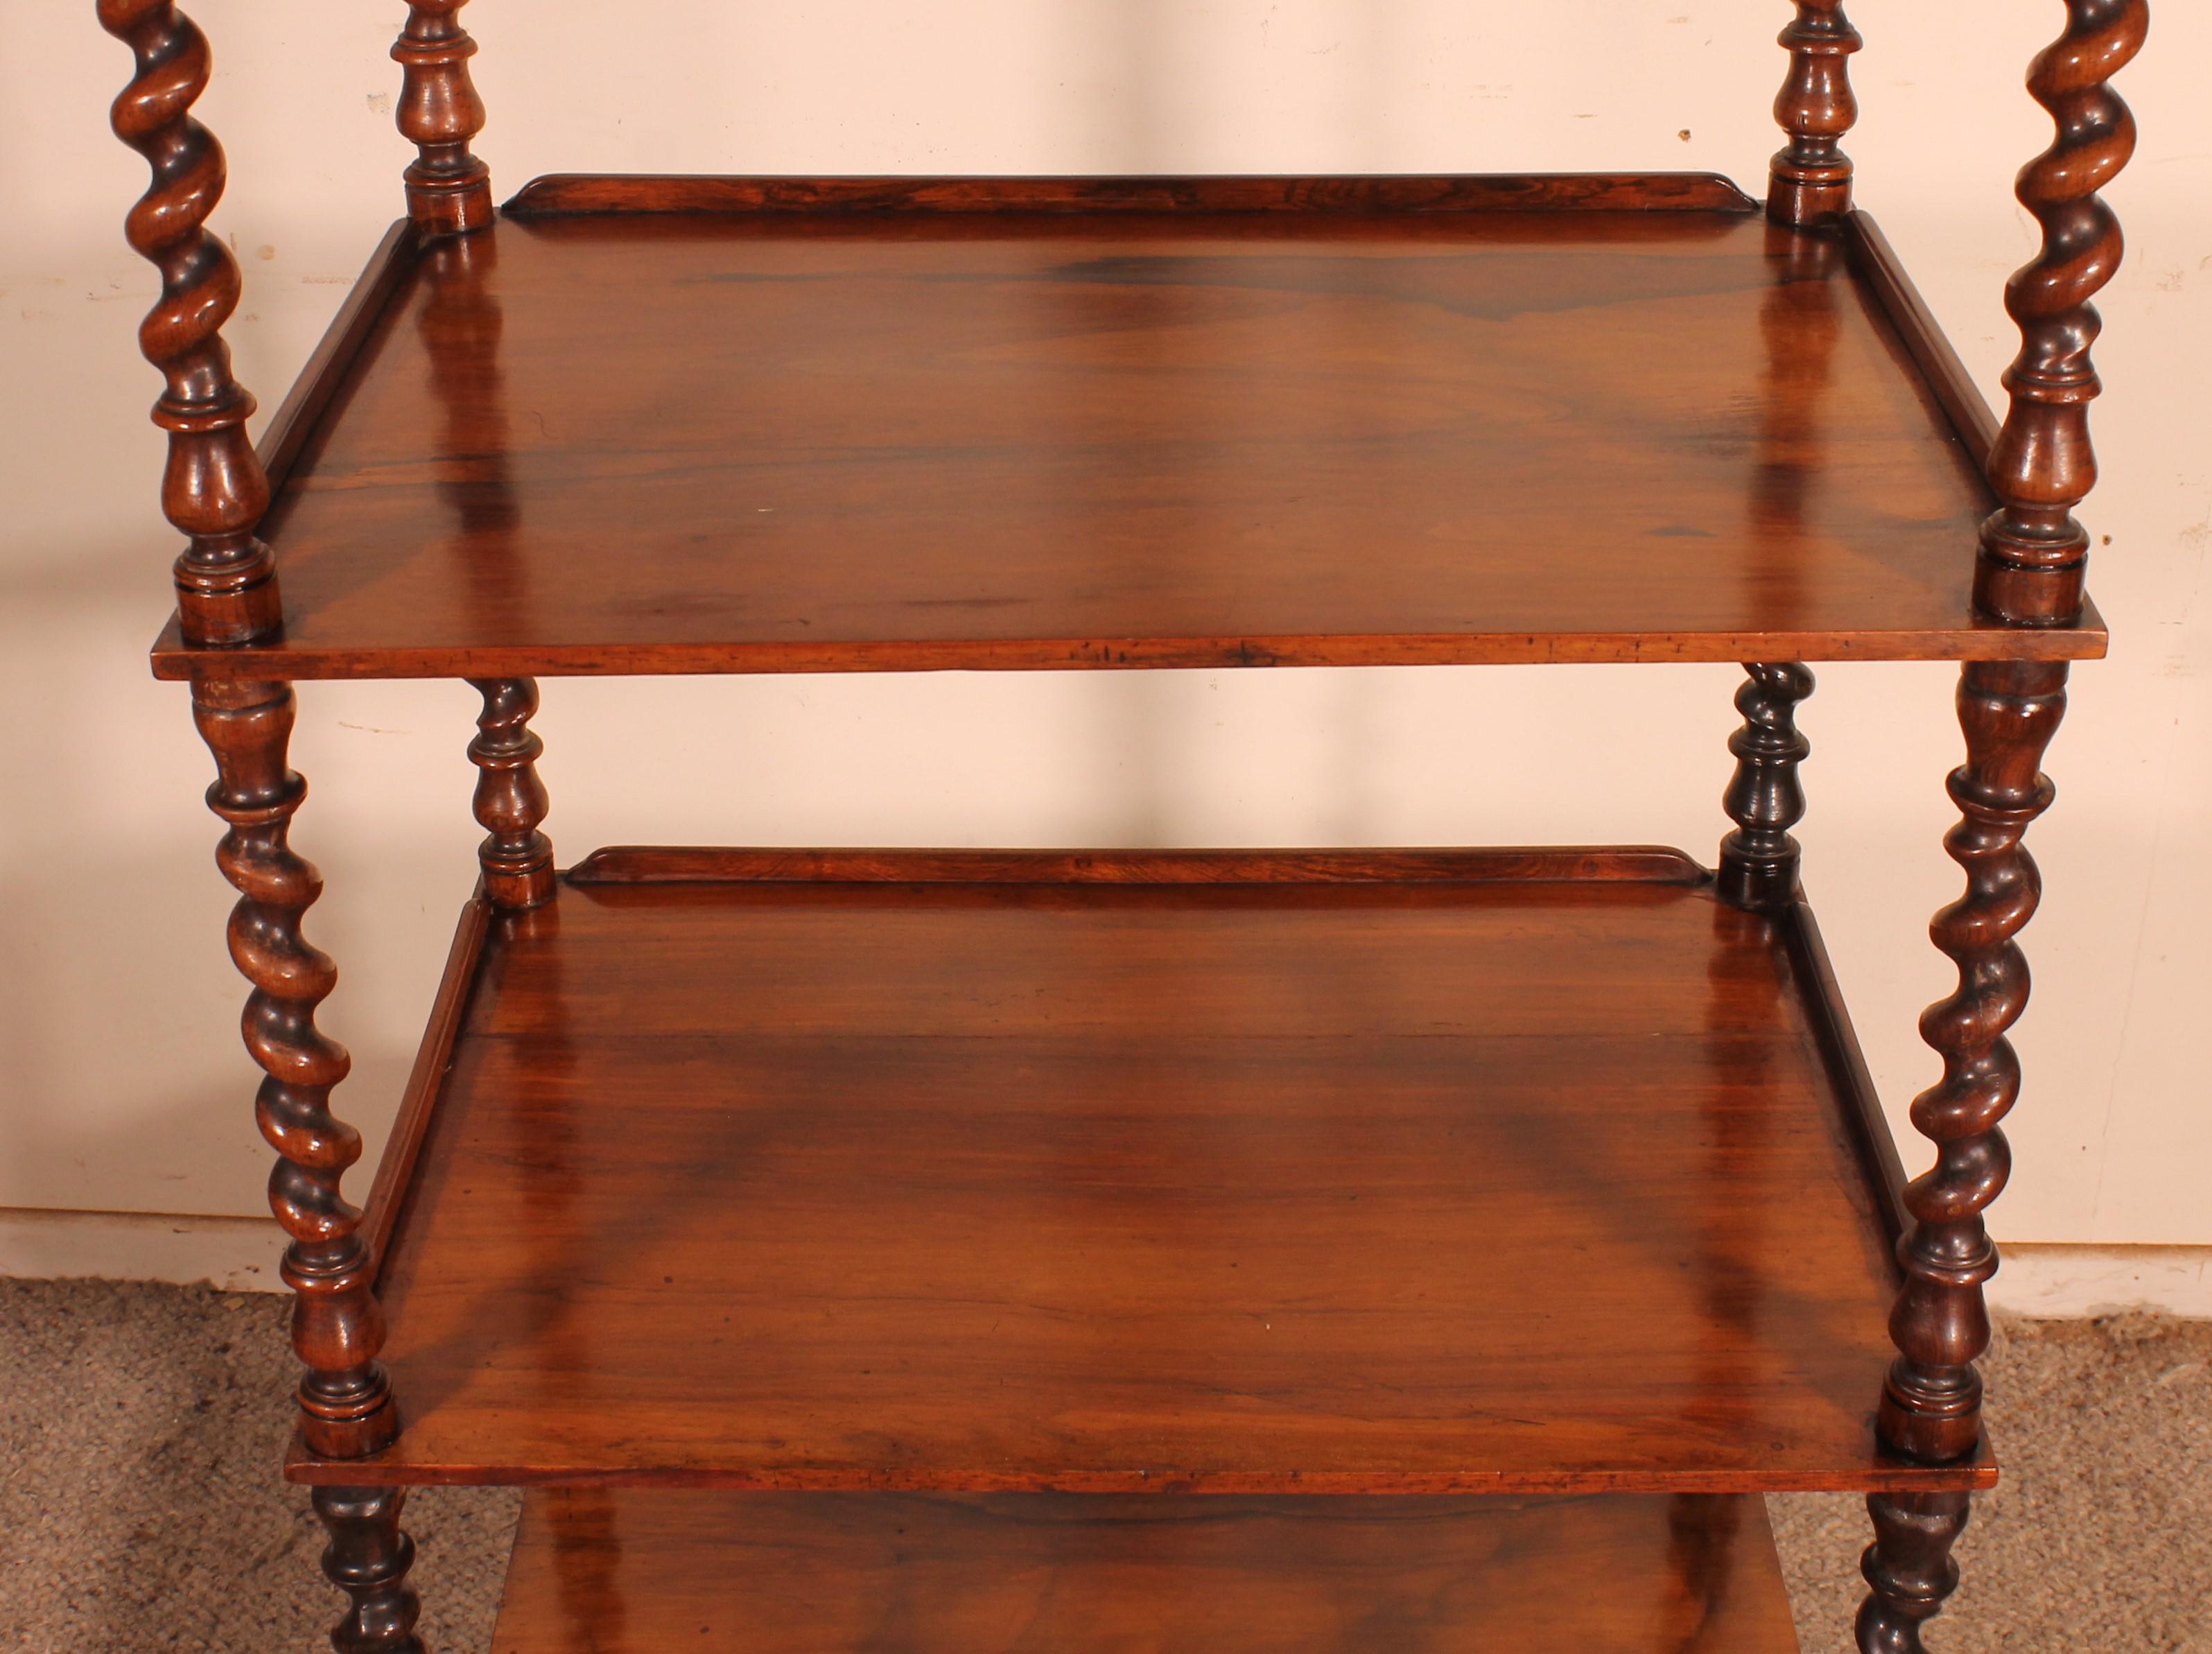 Rosewood Whatnot or Shelf from 19th Century, England 1